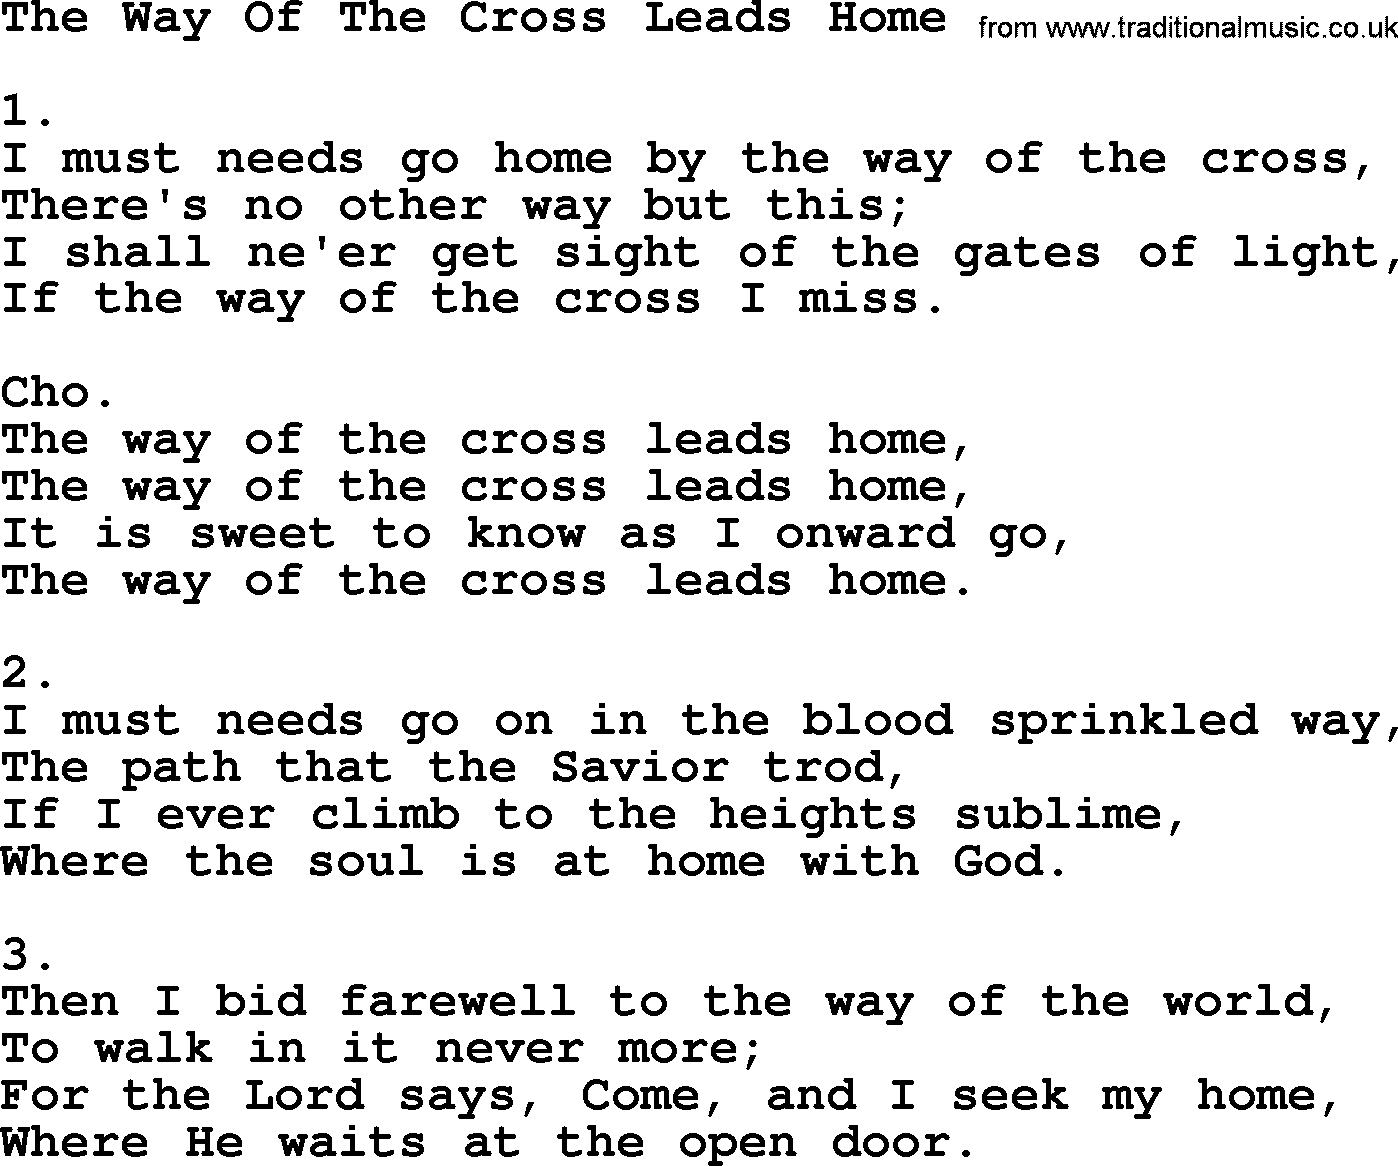 Apostolic & Pentecostal Hymns and Songs, Hymn: The Way Of The Cross Leads Home lyrics and PDF